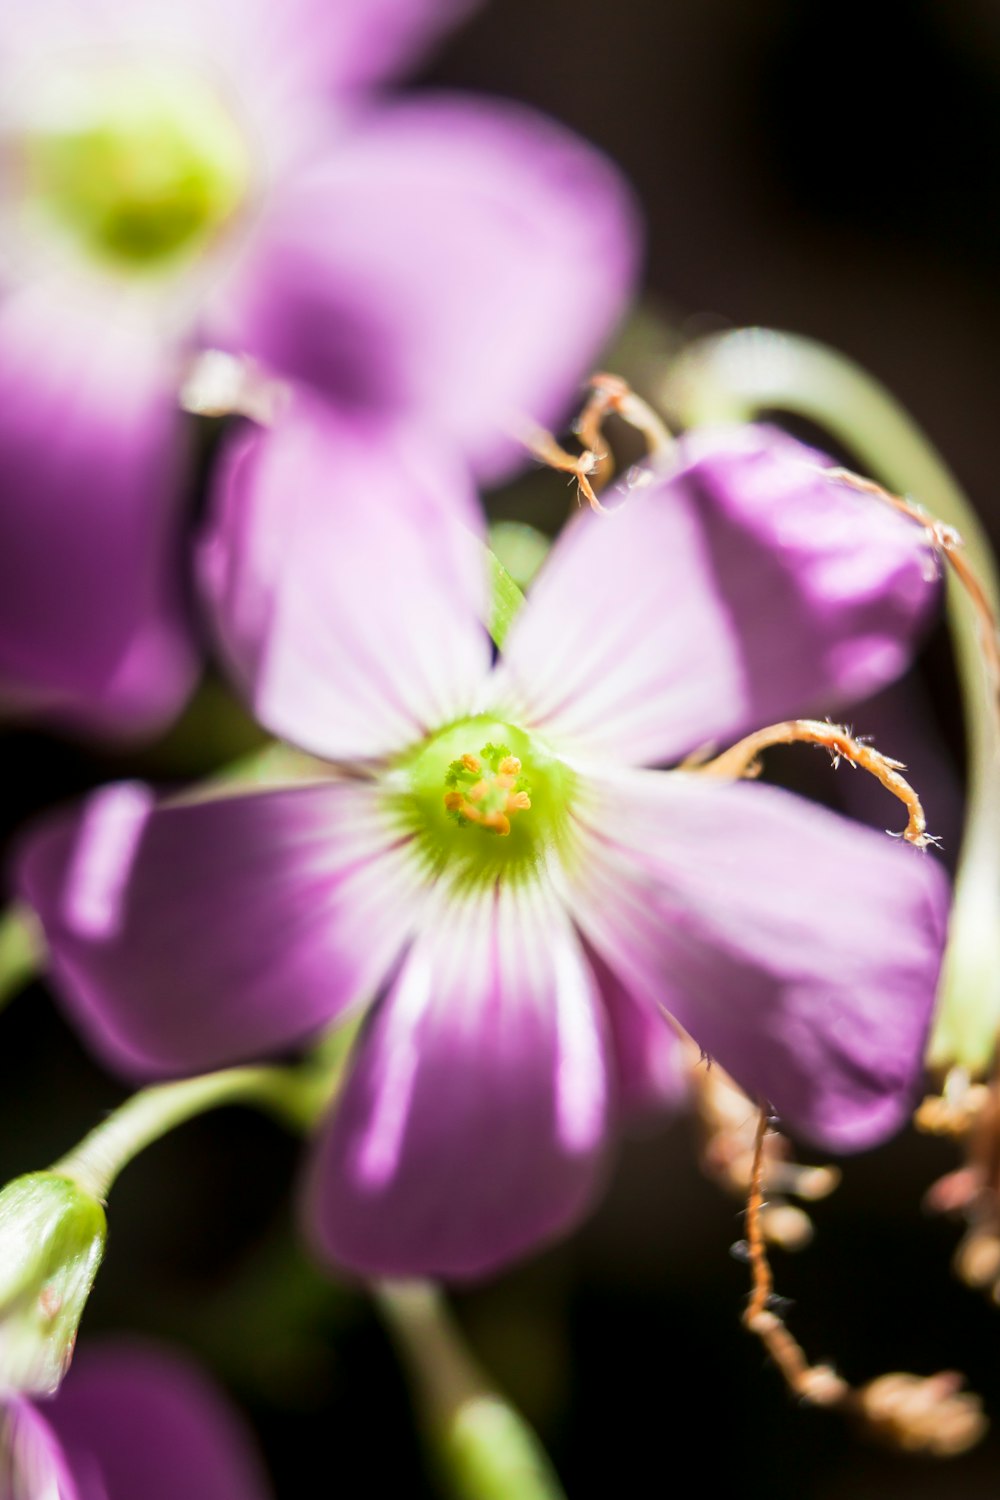 a close up of a purple flower with a green center